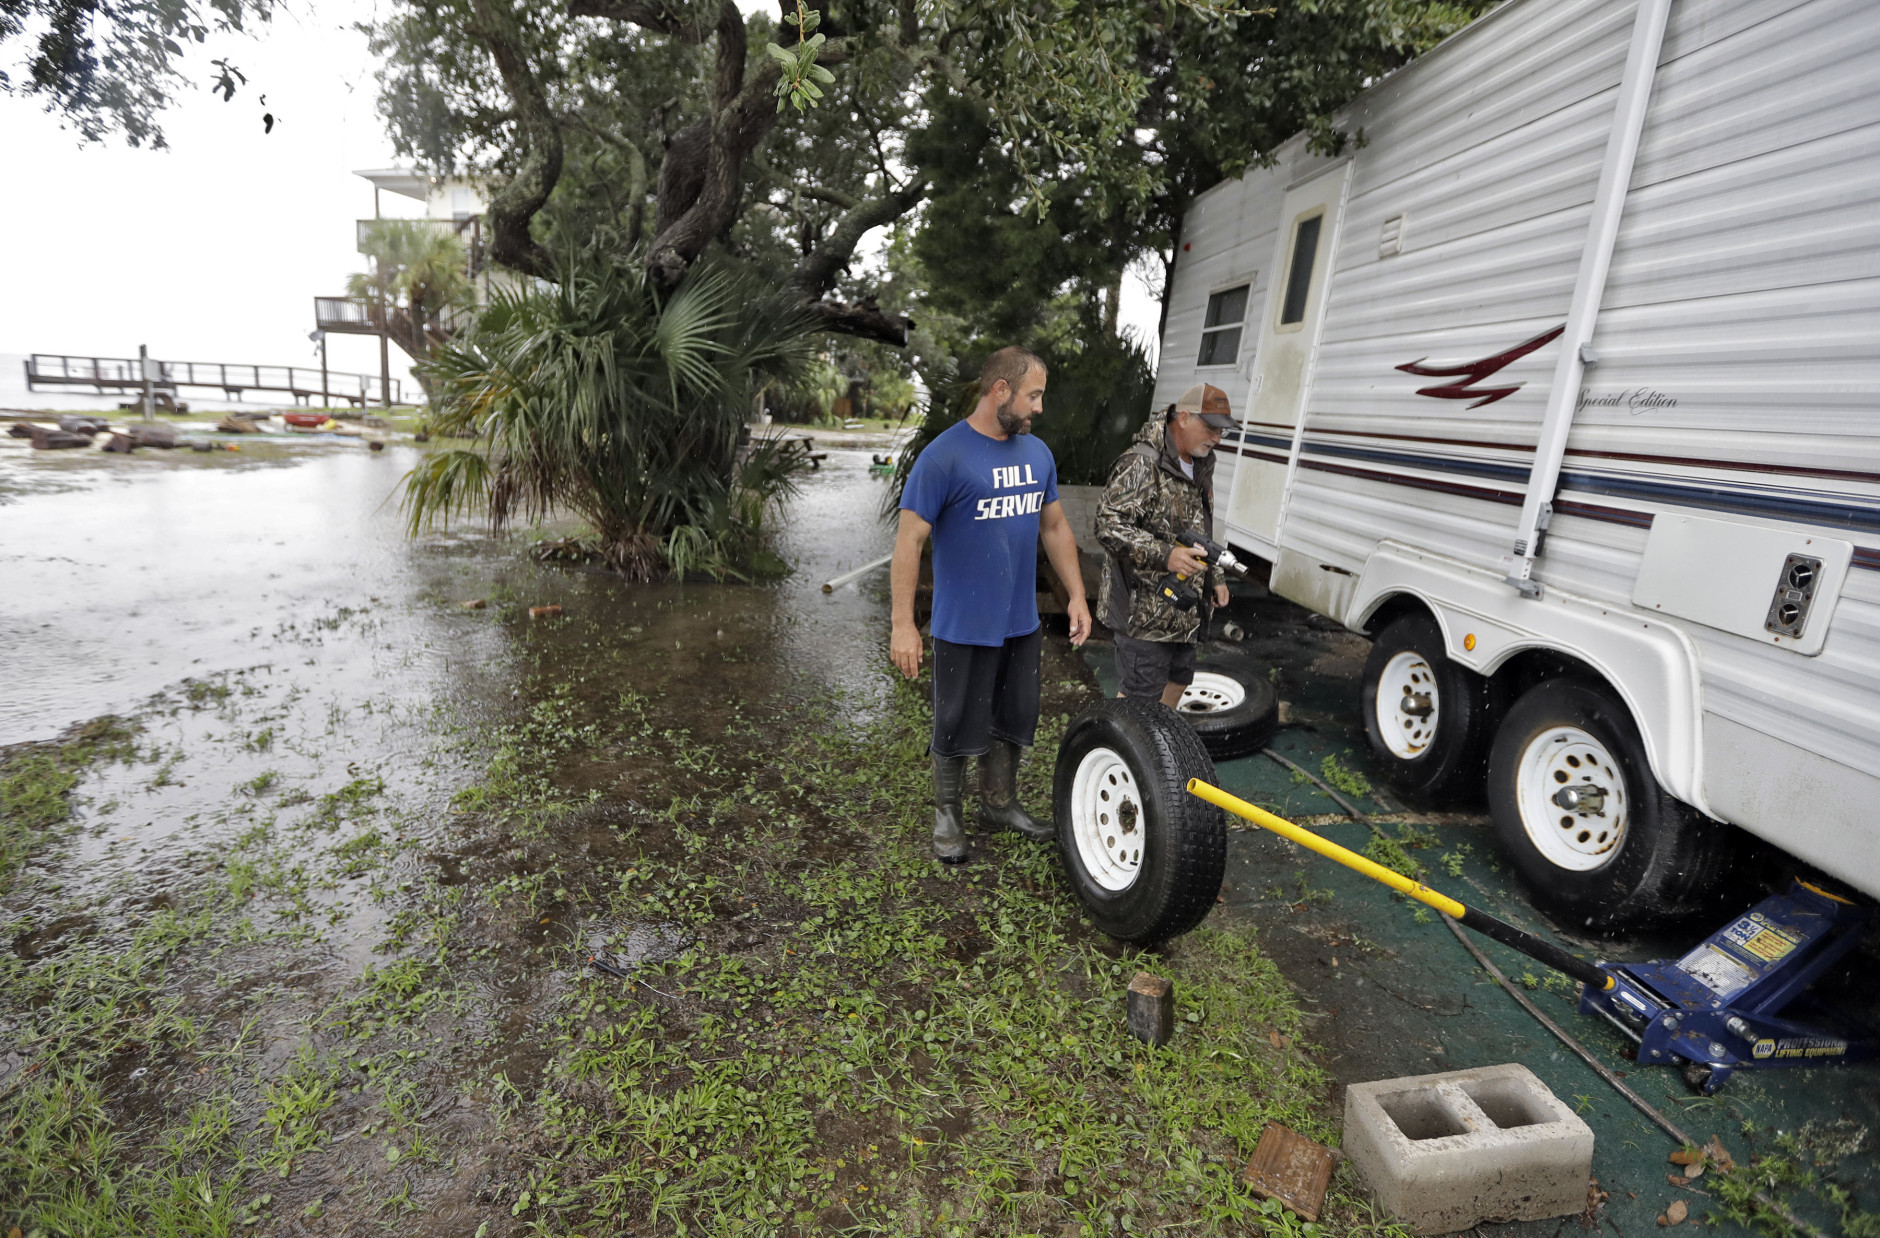 Spyridon Aibejeris, left, helps his neighbors pull out a trailer off their property along the Gulf of Mexico in advance of Tropical Storm Hermine Thursday, Sept. 1, 2016, in Keaton Beach, Fla. Hermine strengthened into a hurricane Thursday and steamed toward Florida's Gulf Coast, where people put up shutters, nailed plywood across store windows and braced for the first hurricane to hit the state in over a decade. (AP Photo/Chris O'Meara)